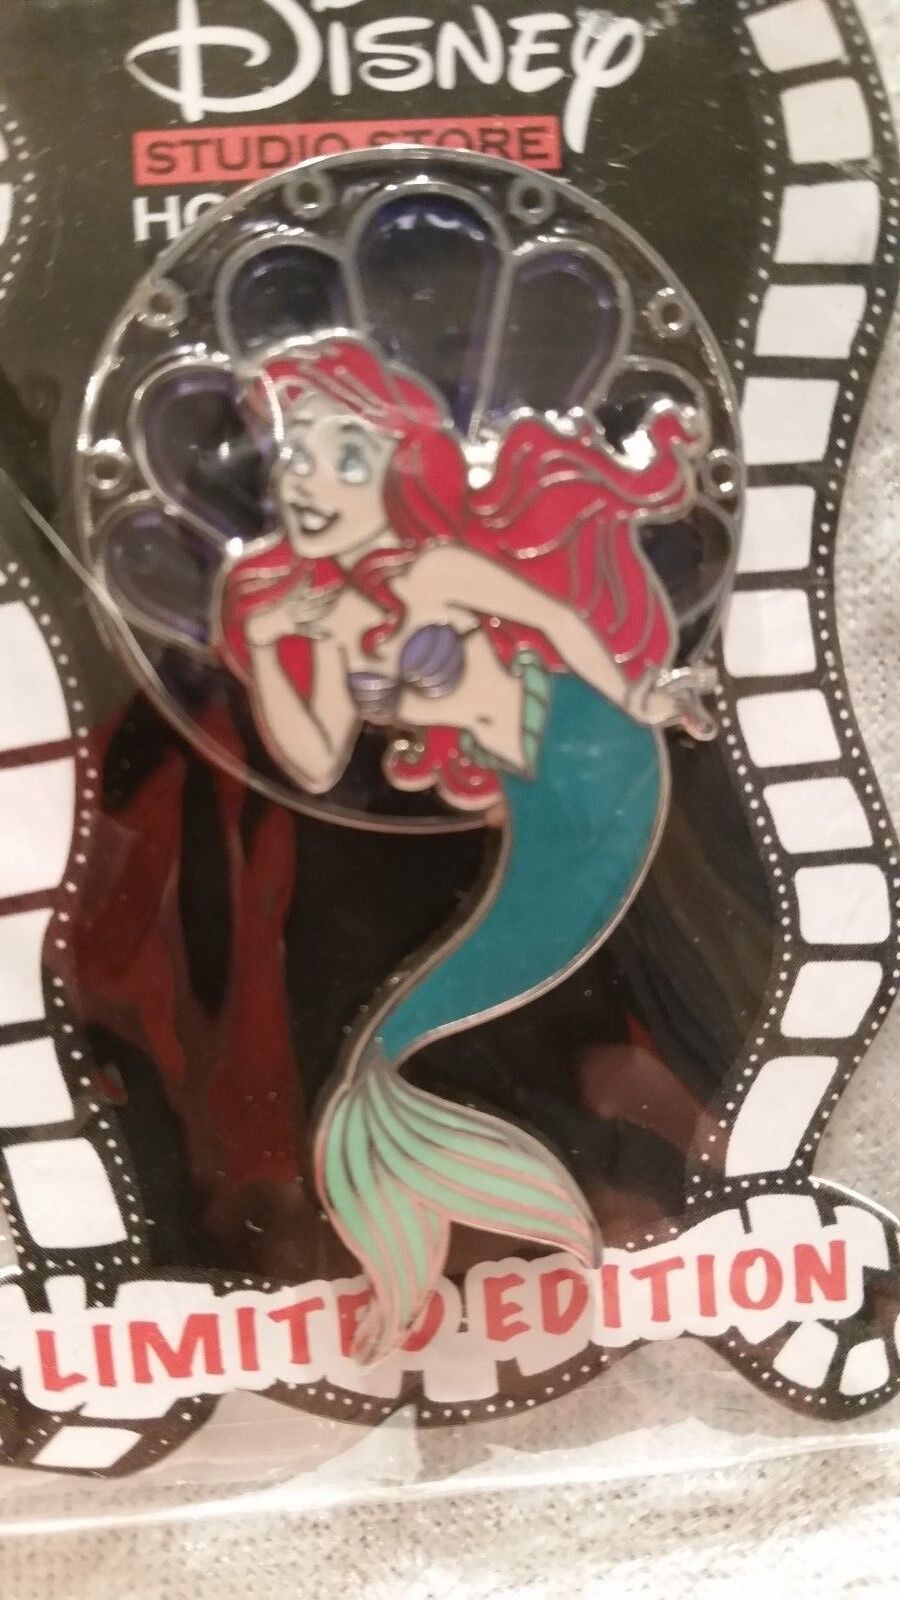 DSF 2014 NEW ARIEL MEMAID LIMITED EDITION 400 SPHERICAL WINDOW STAINED GLASS PIN